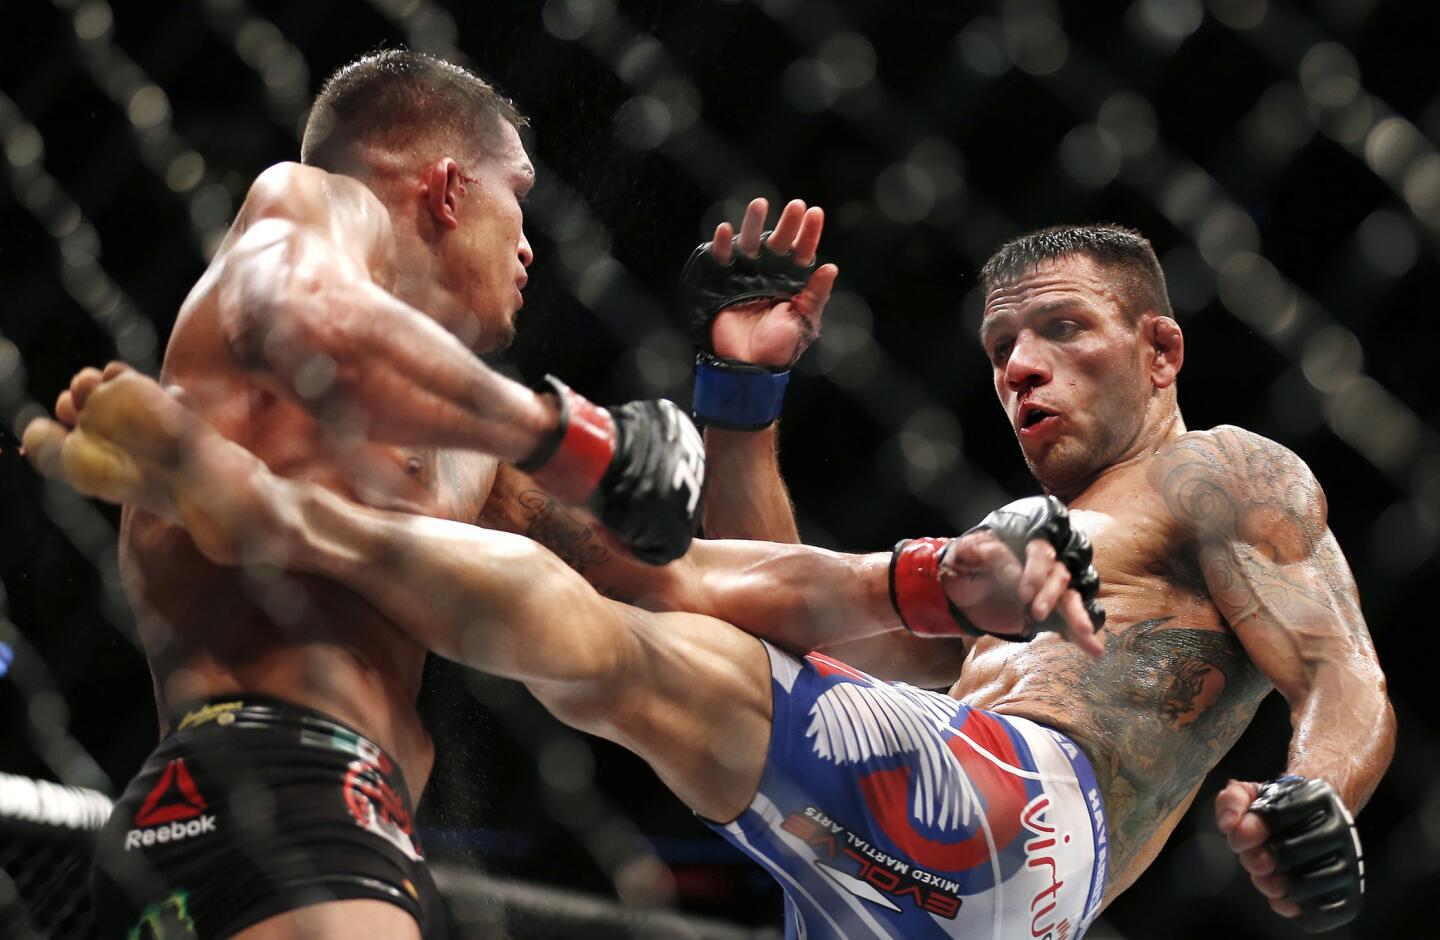 Rafael Dos Anjos, right, delivers a kick to Anthony Pettis on his way to winning the lightweight title during UFC 185 in Dallas on March 15, 2015.